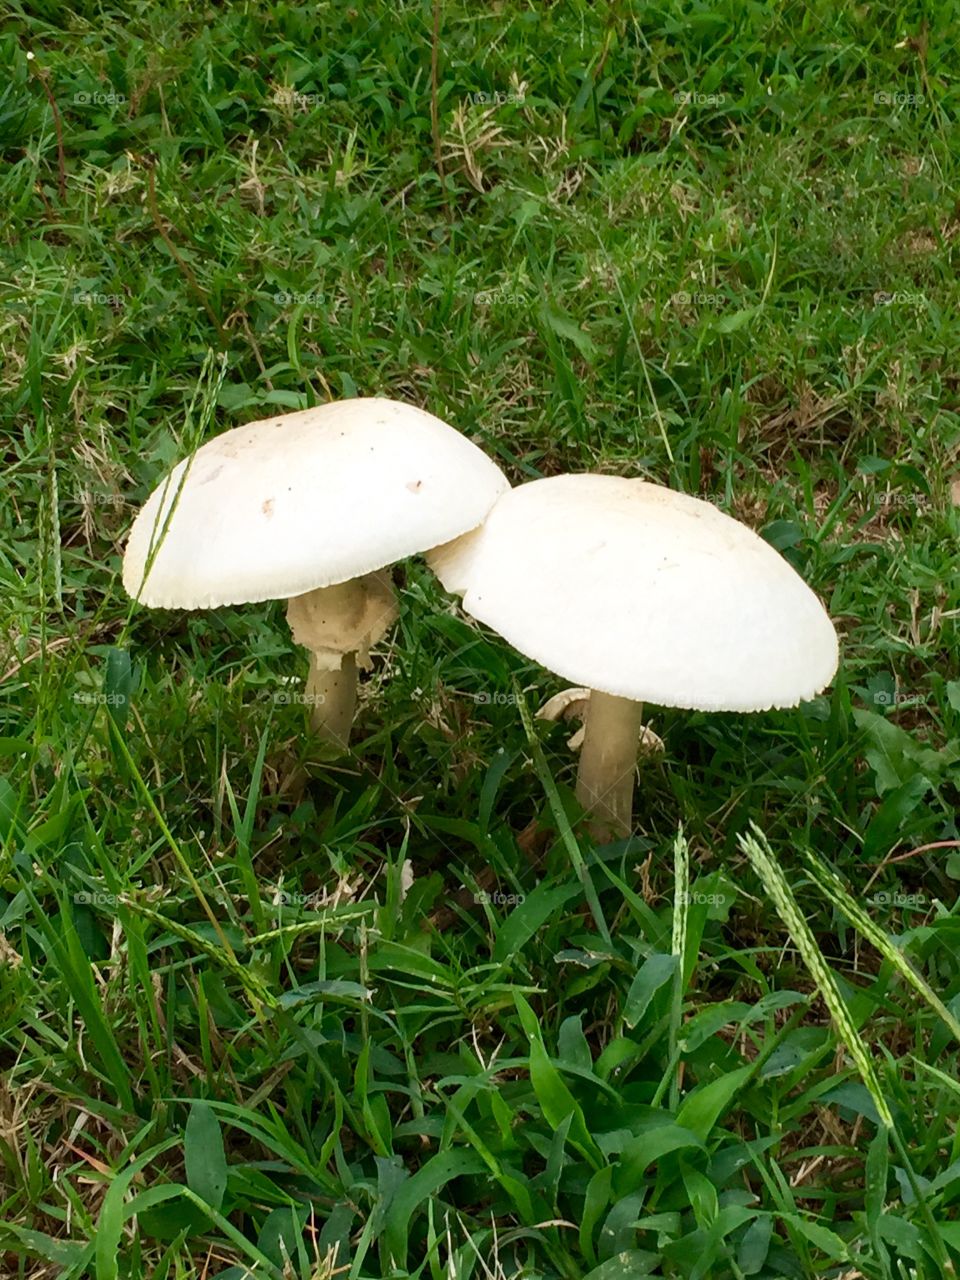 Two mushrooms side by side. I protected these from being trampled by my dogs.